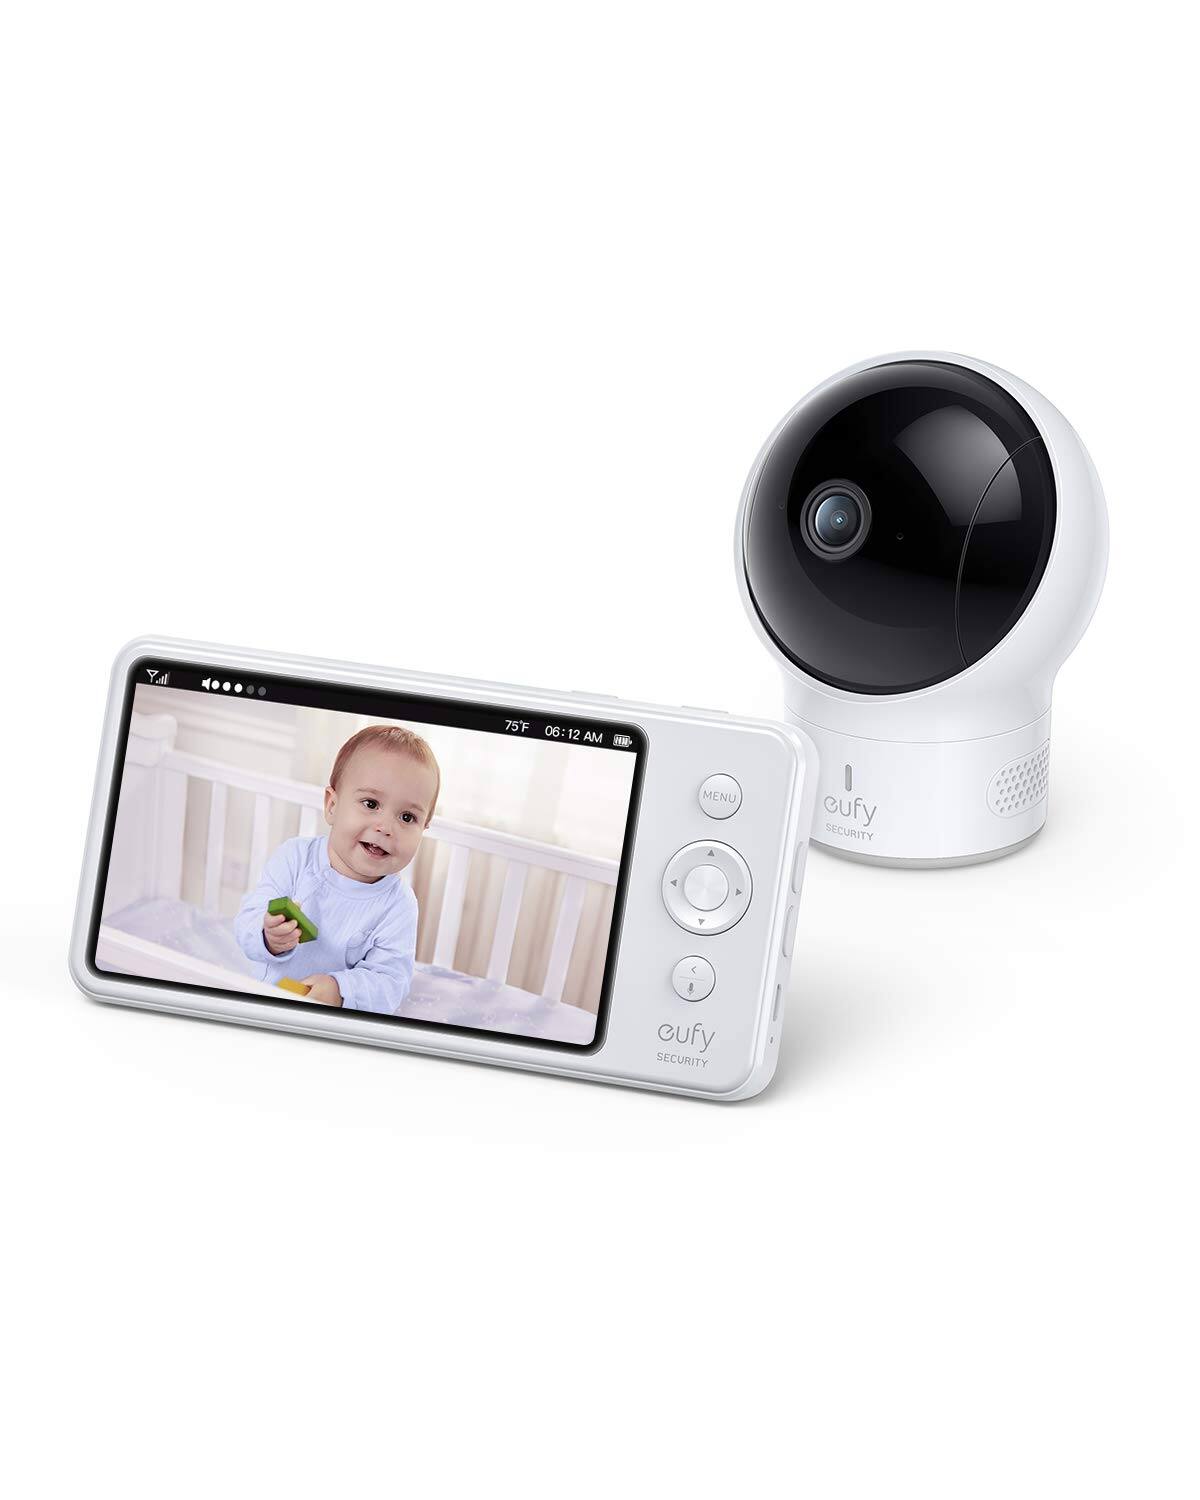 eufy Security SpaceView Pro Video Baby Monitor with 5’’ Screen, Pan & Tilt with Two-Way Audio, 5200mAh Battery $129.49 + FS with PRIME